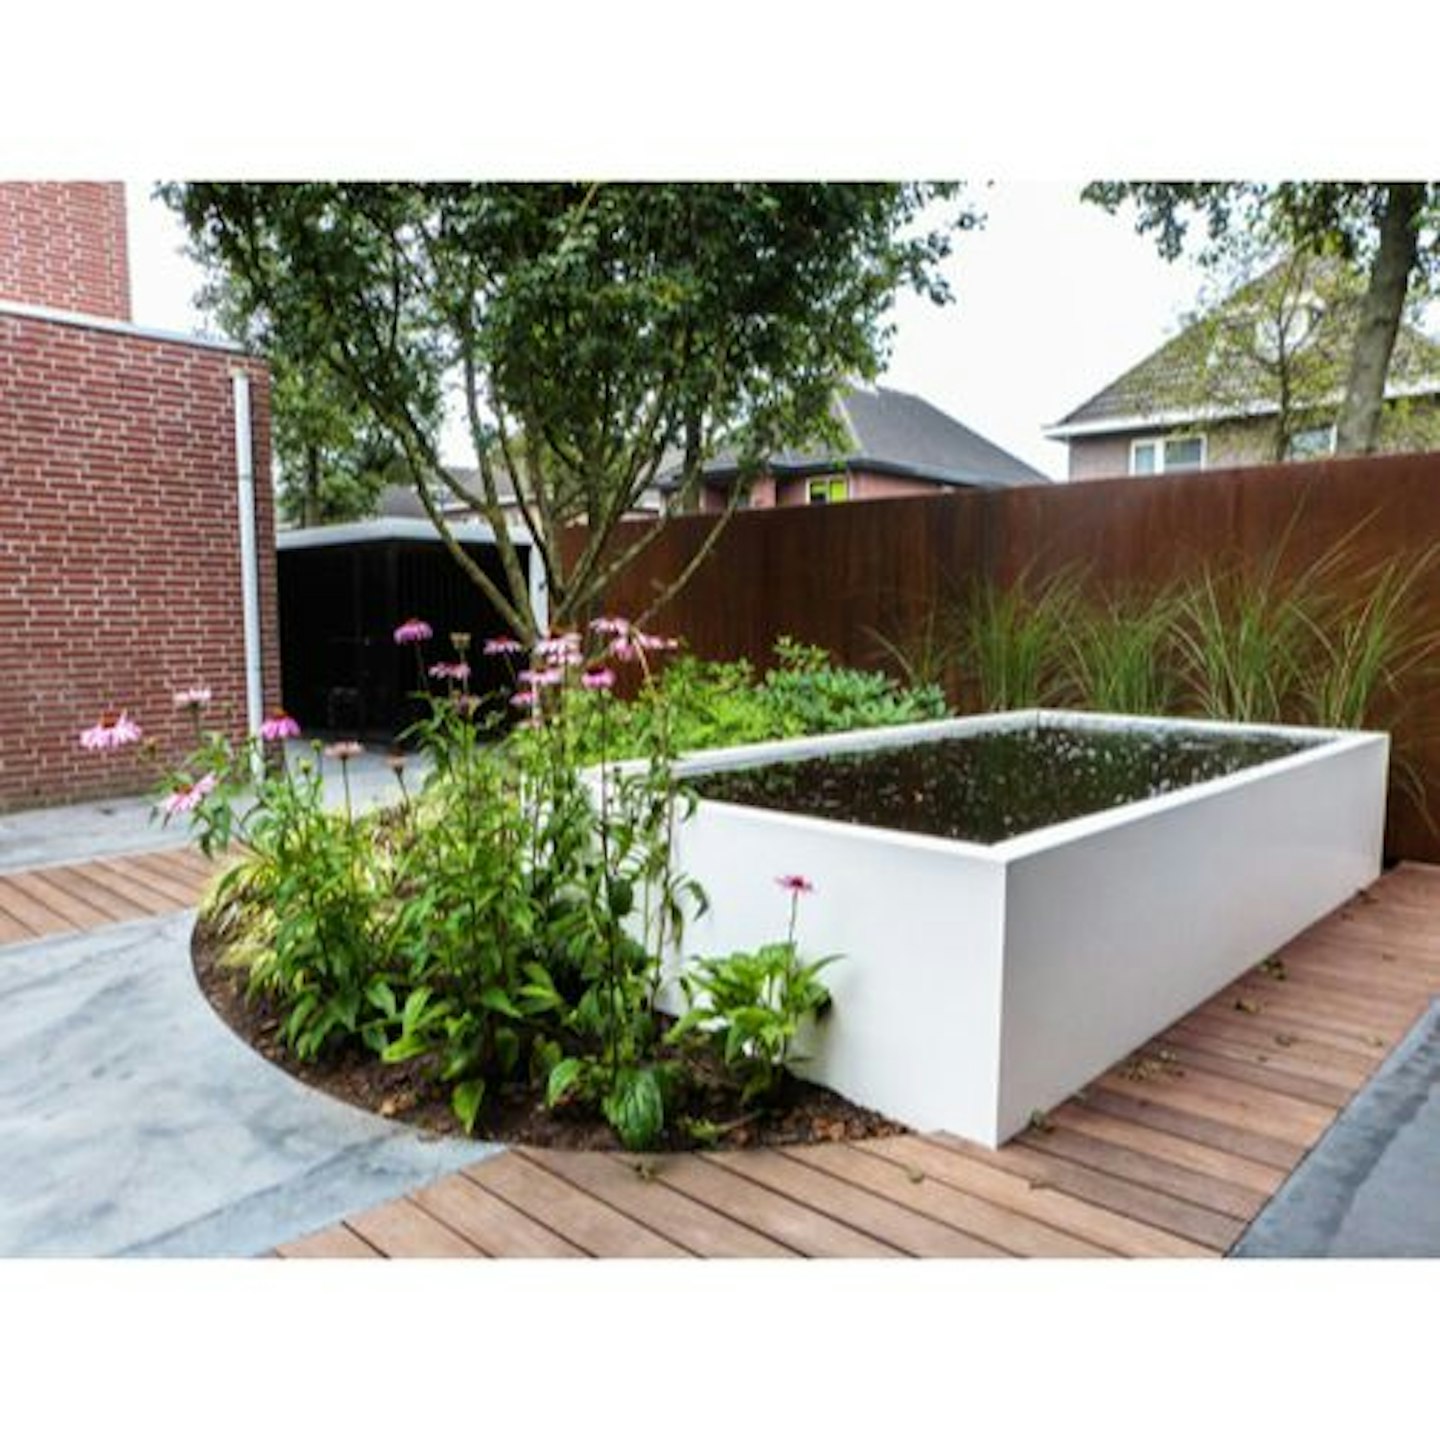 white aluminium raised pond set into pink flowers and wooden decking